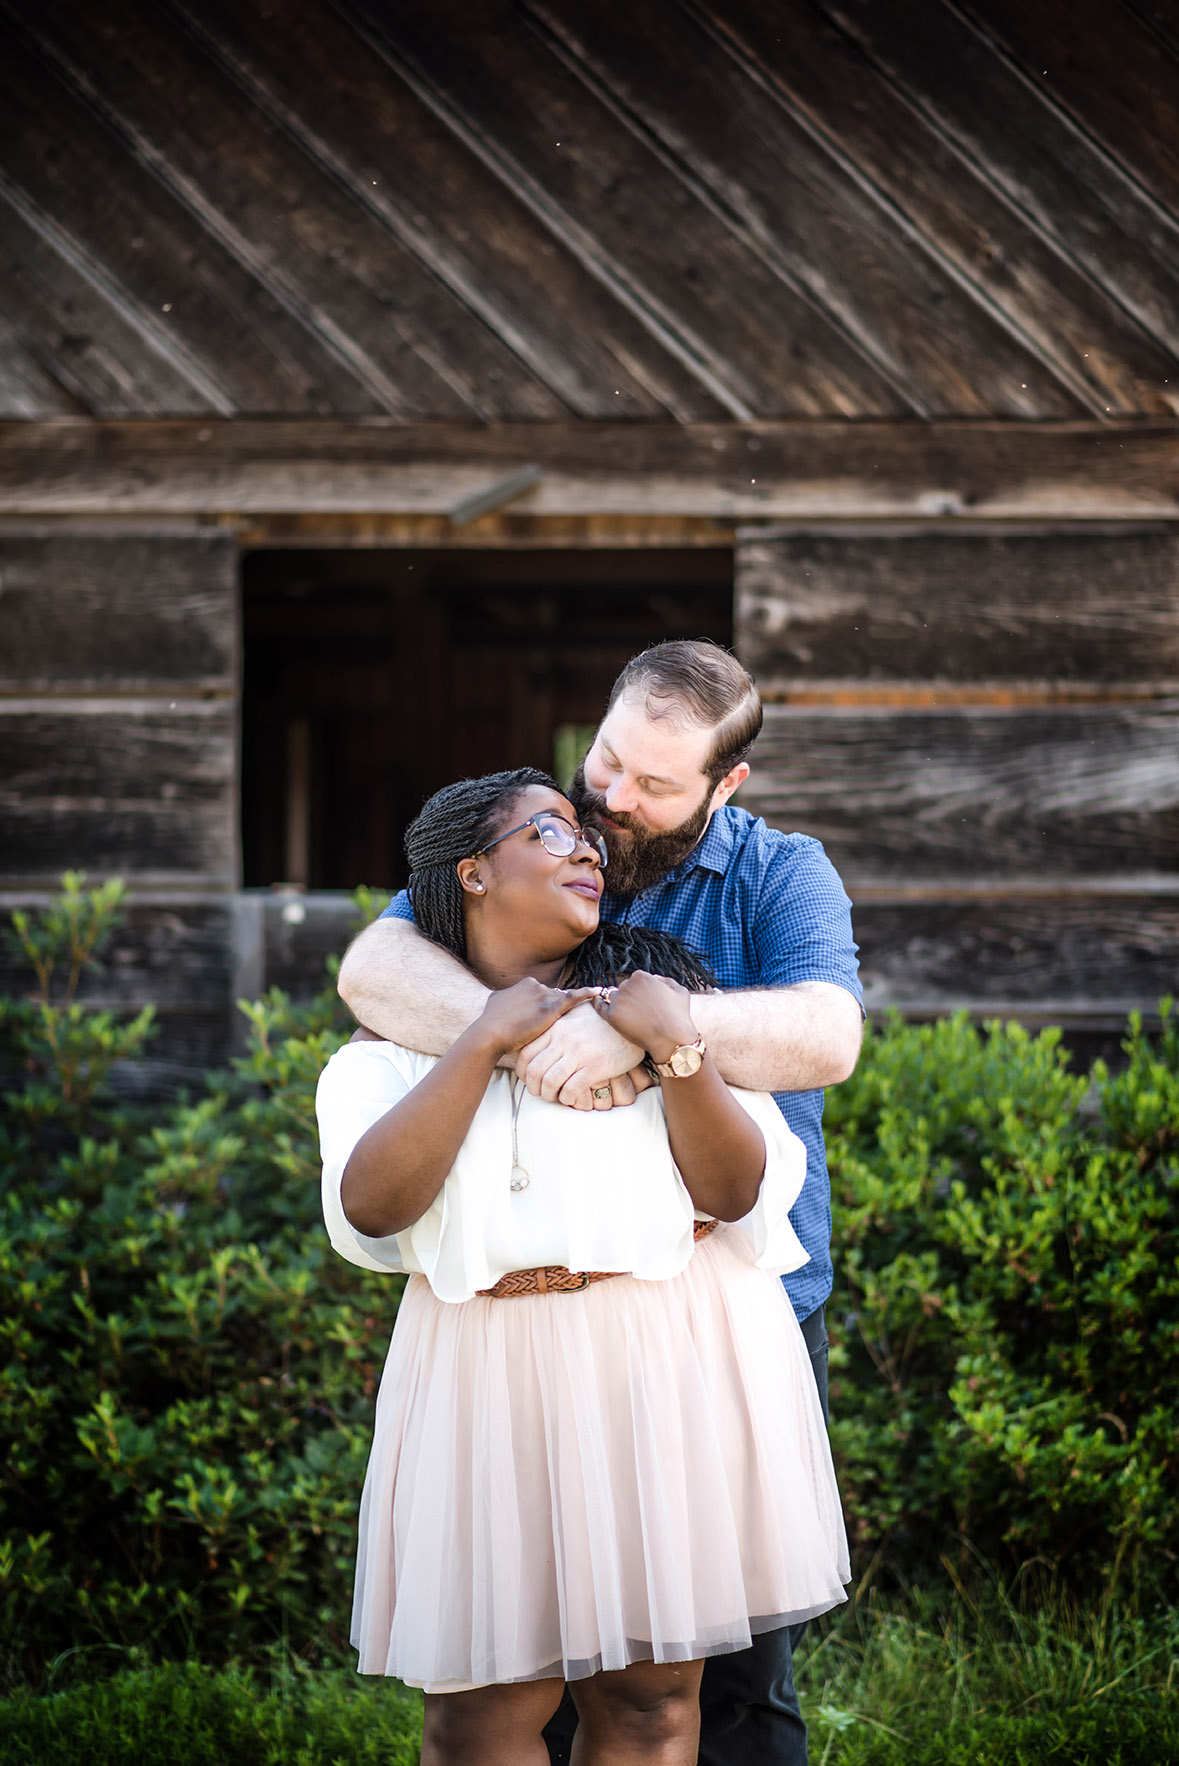 ENGAGEMENT | Relaxed and Laid Back Outdoor Engagement Shoot | La Joy Photography | Pretty Pear Bride